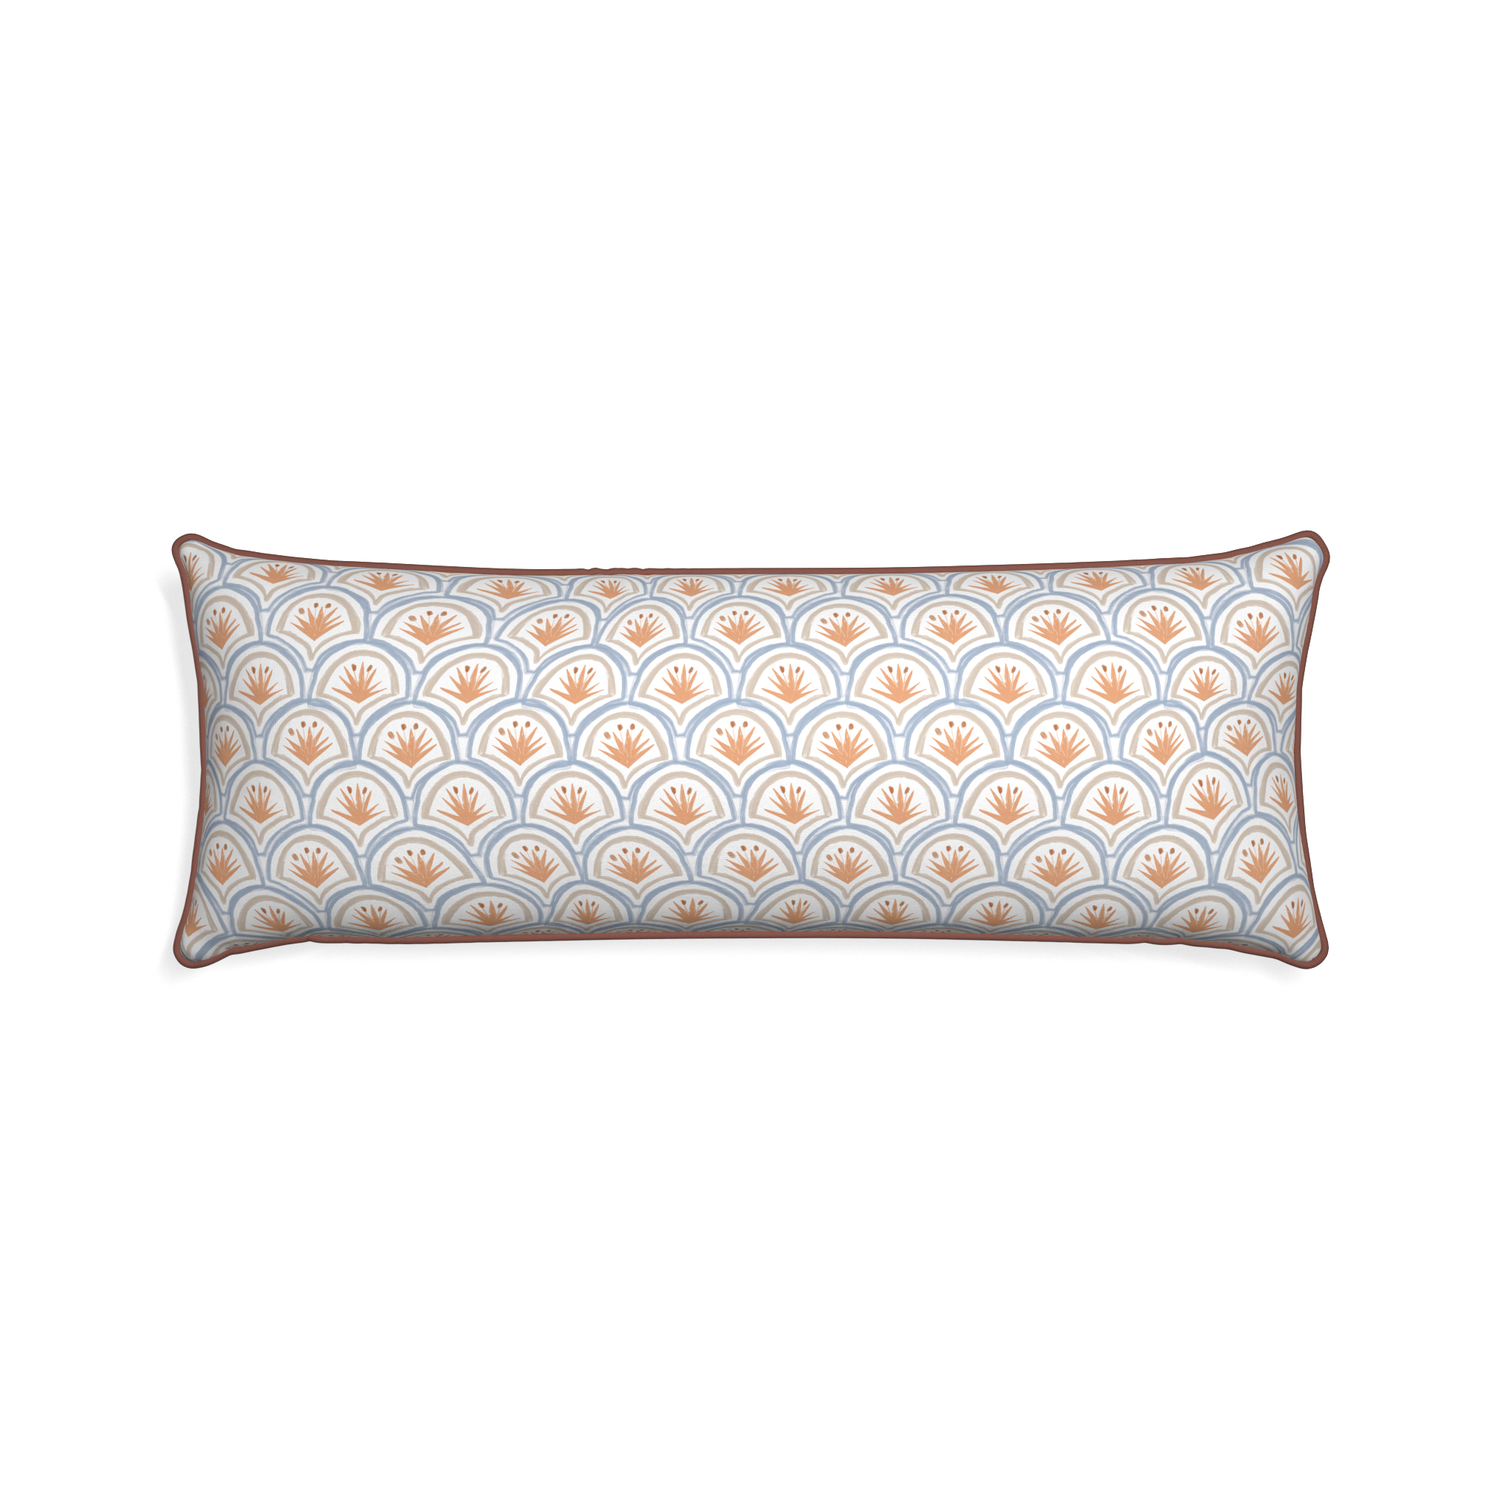 Xl-lumbar thatcher apricot custom art deco palm patternpillow with w piping on white background